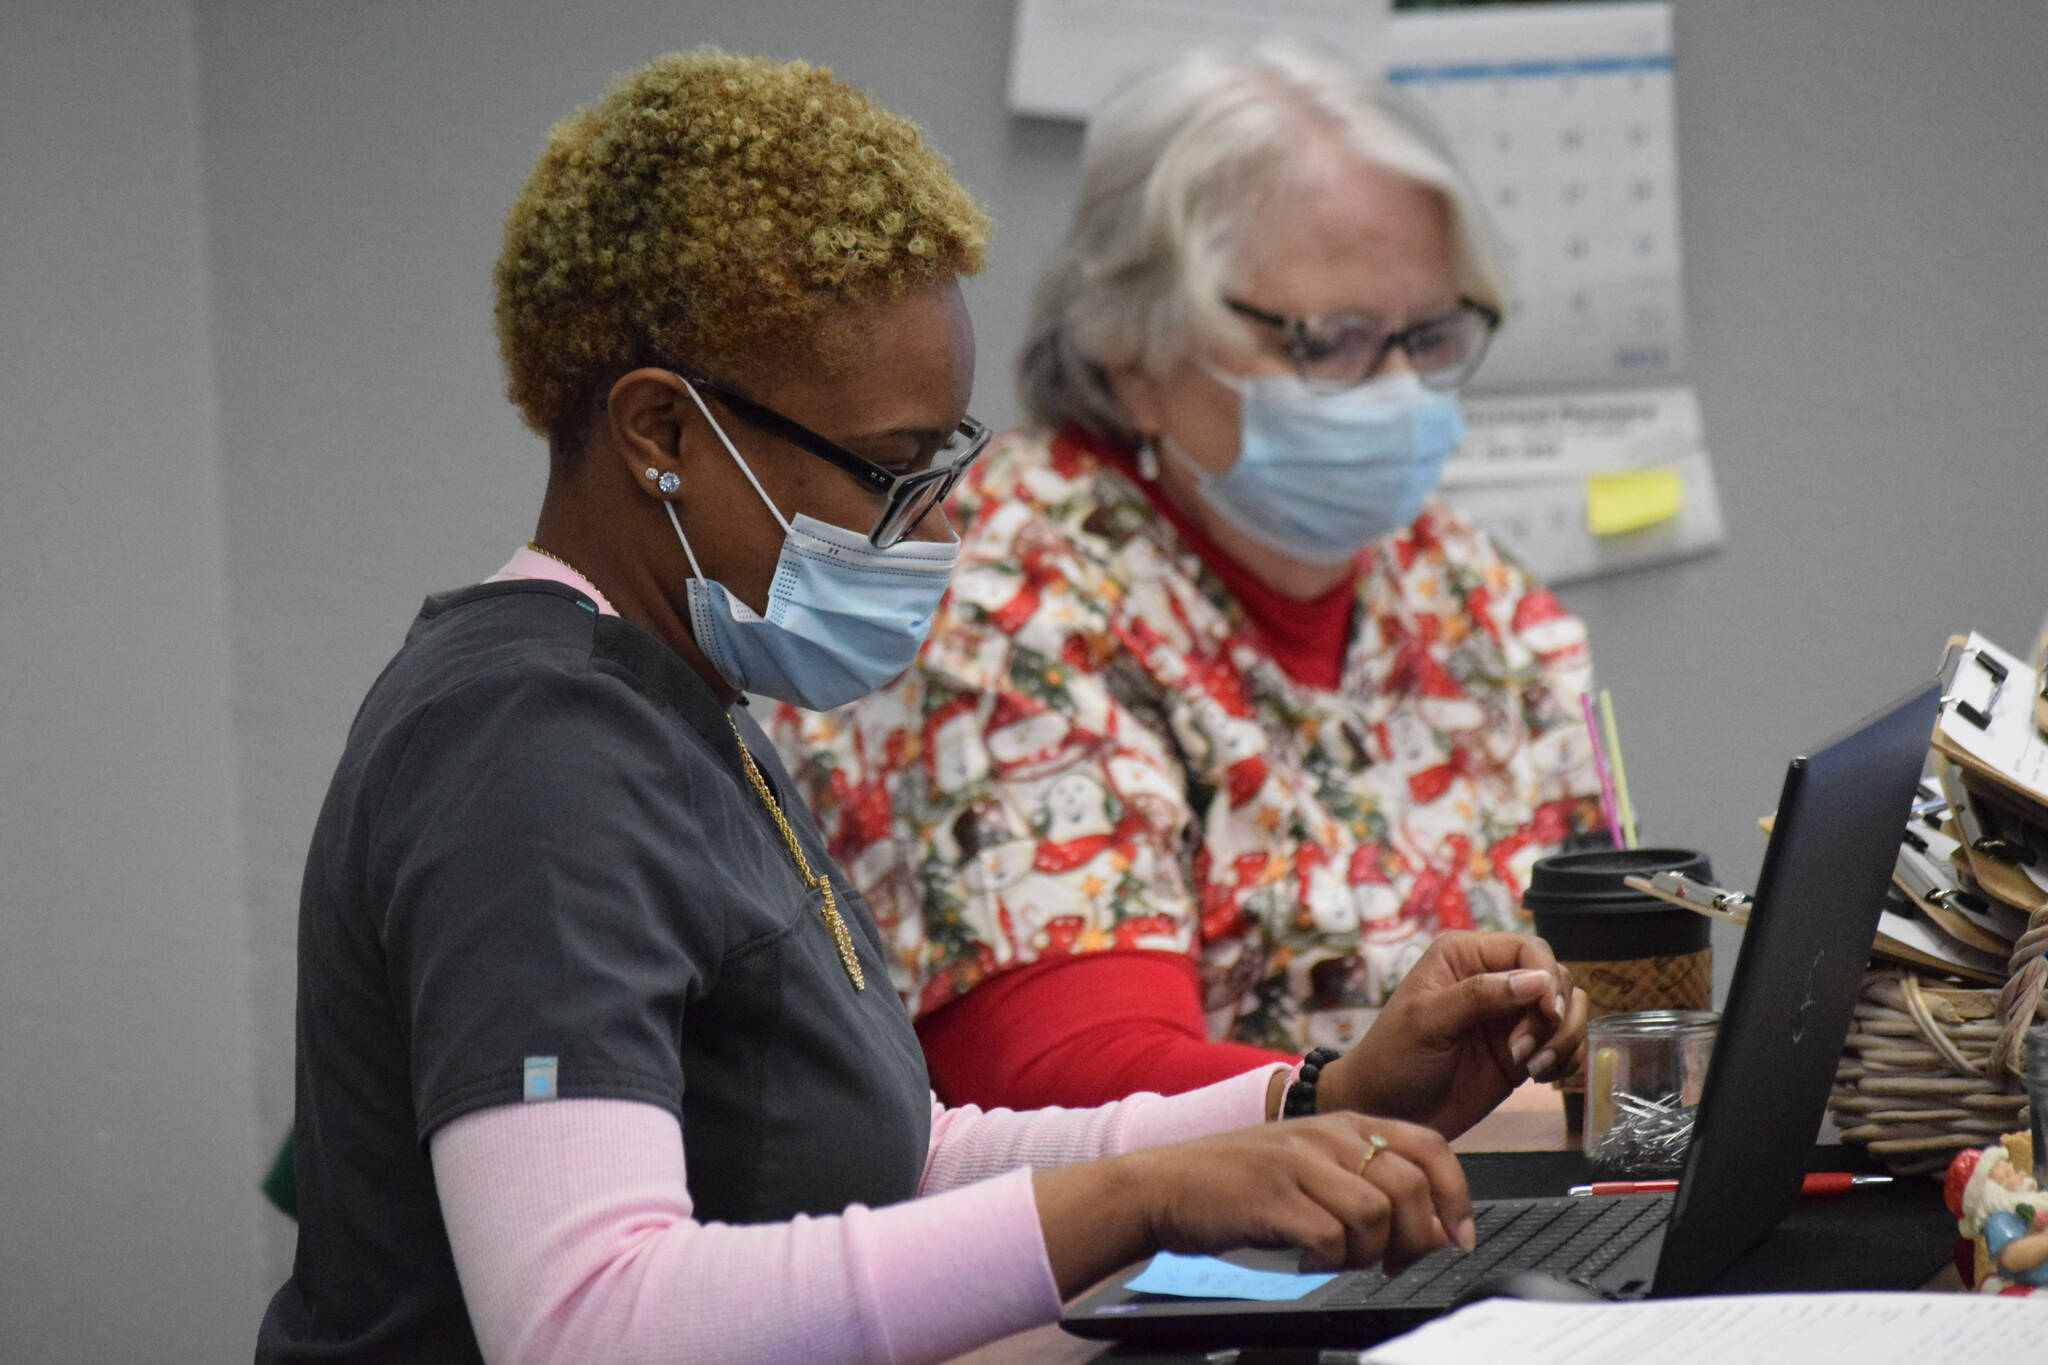 Certified nursing assistant KaDaisjah Roberts, left, and nurse Debbie Aubin, right, work at the “Y” vaccine clinic in Soldotna on Dec. 22, 2021. (Camille Botello/Peninsula Clarion)